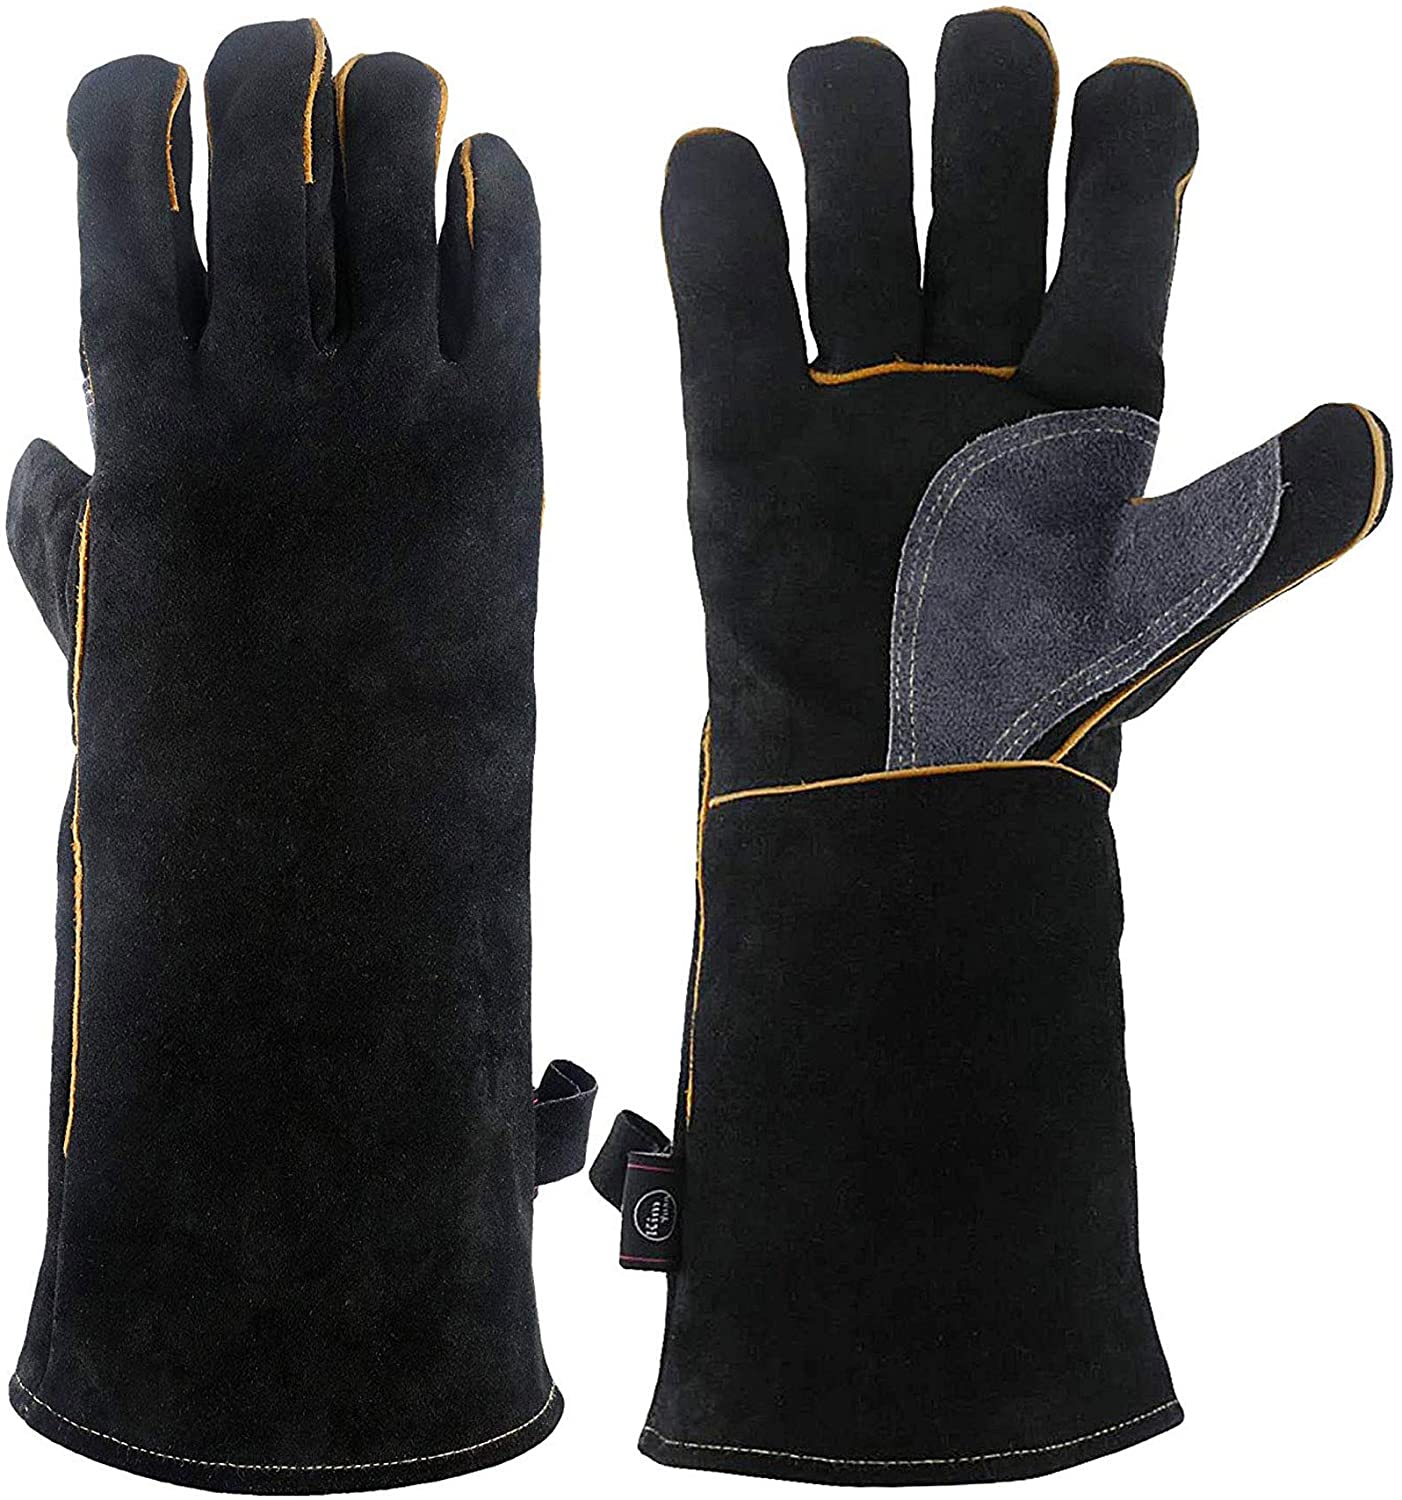 KIM YUAN Extreme Heat & Fire Resistant Gloves